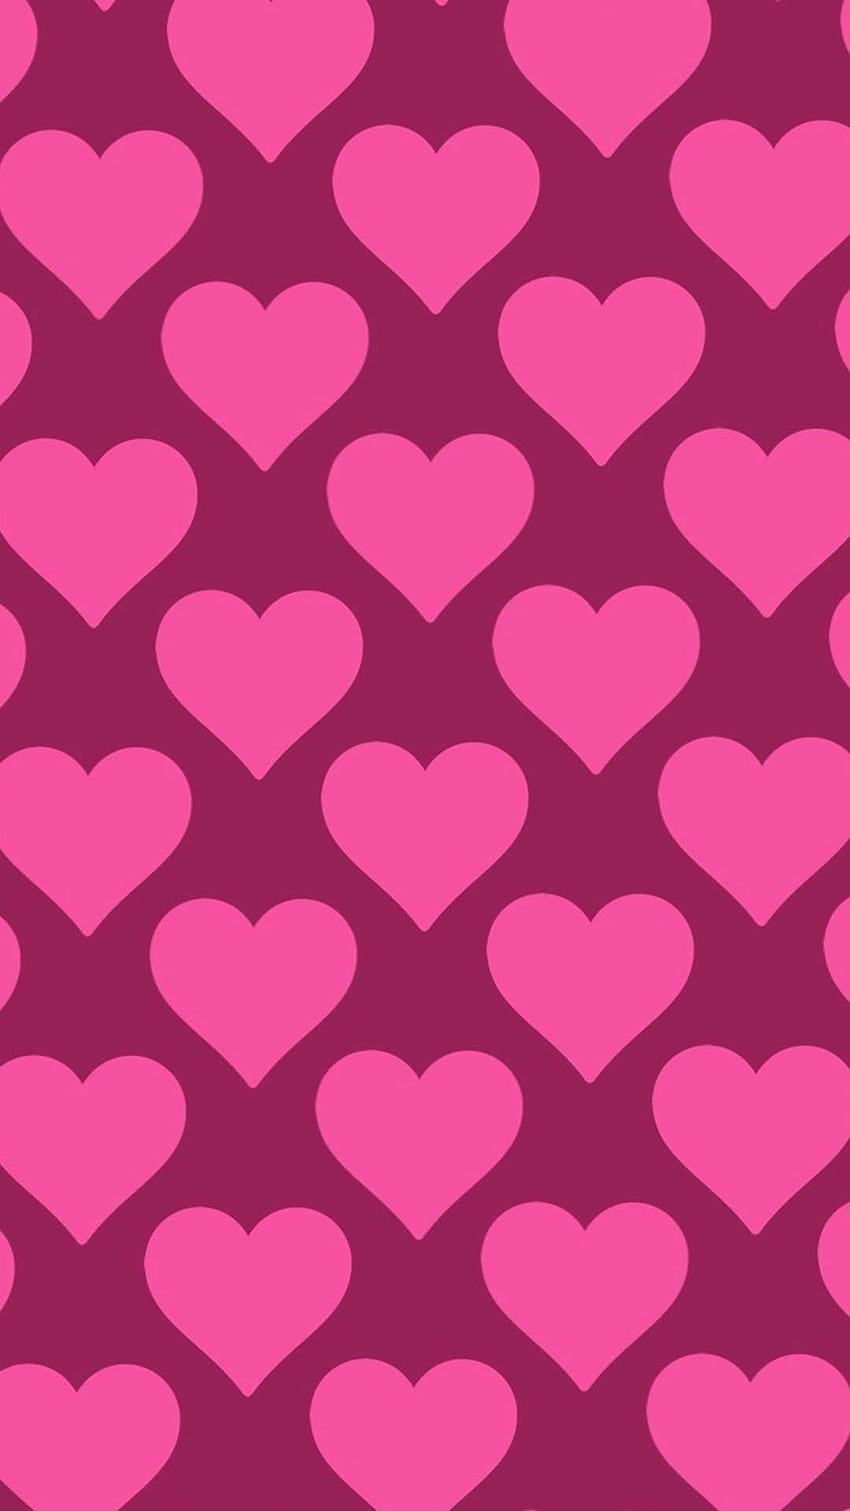 Free Pink Heart Wallpaper For Phone and Computer  Skip To My Lou